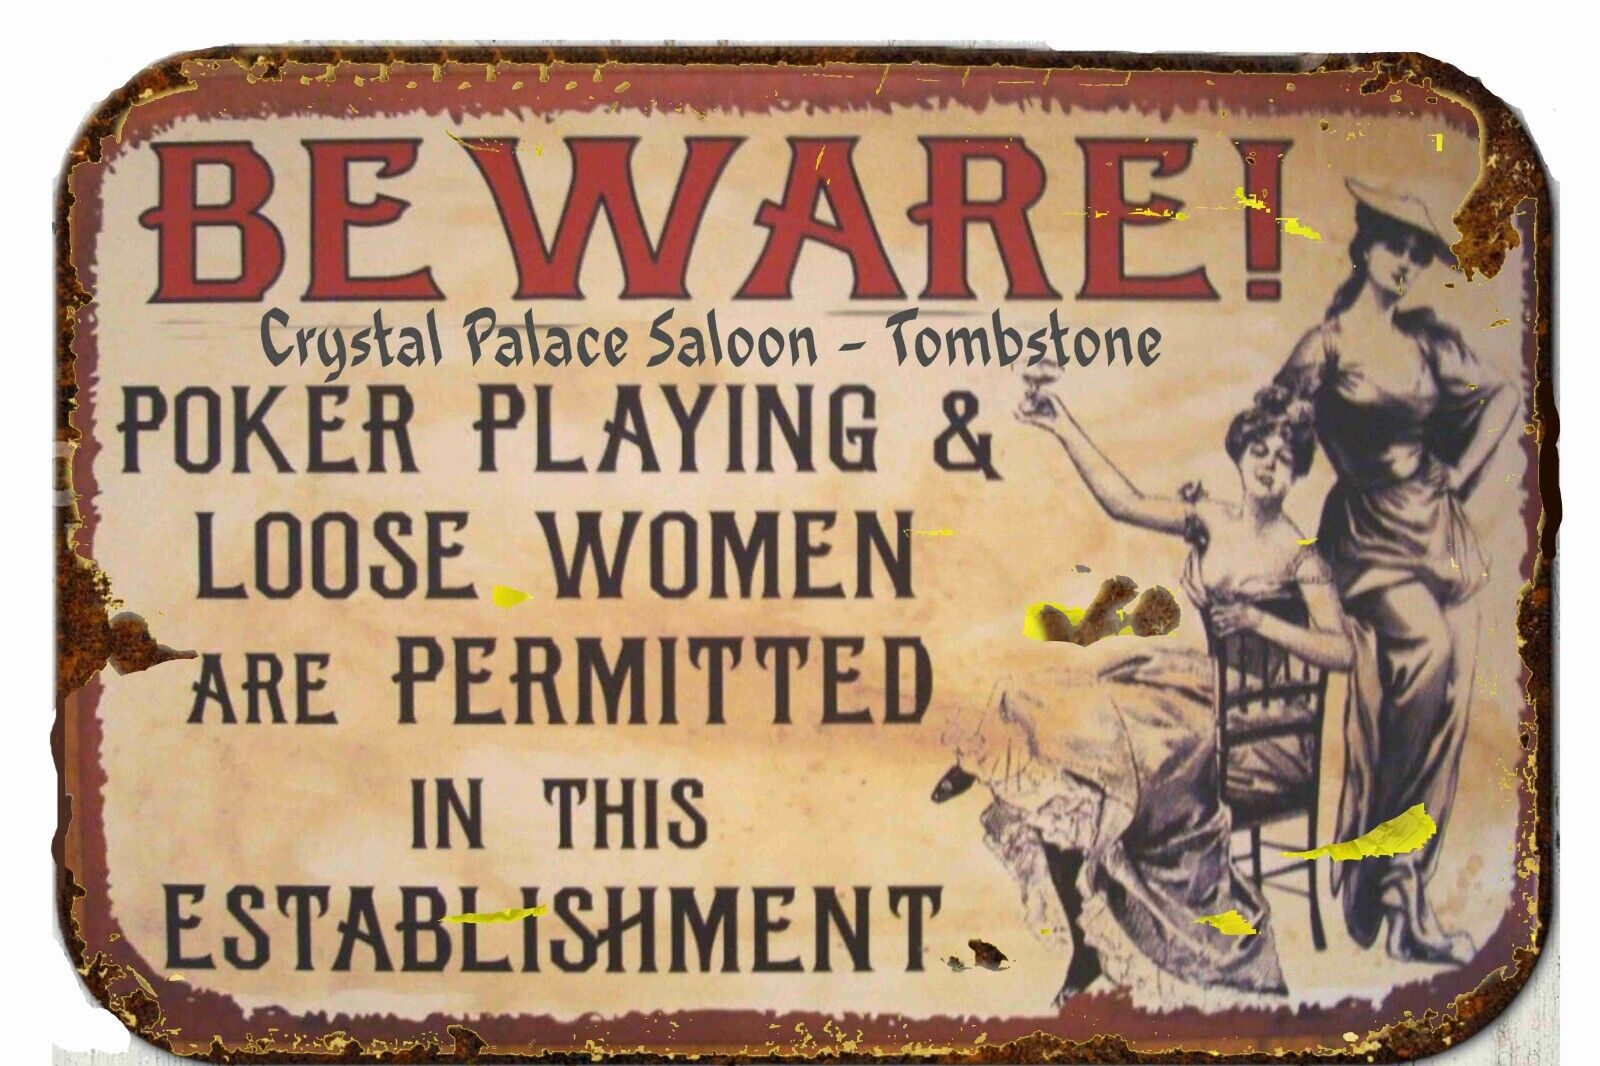 Beware Of Loose Women andpoker players  Mouse Pad  7 x 9 Mousepad